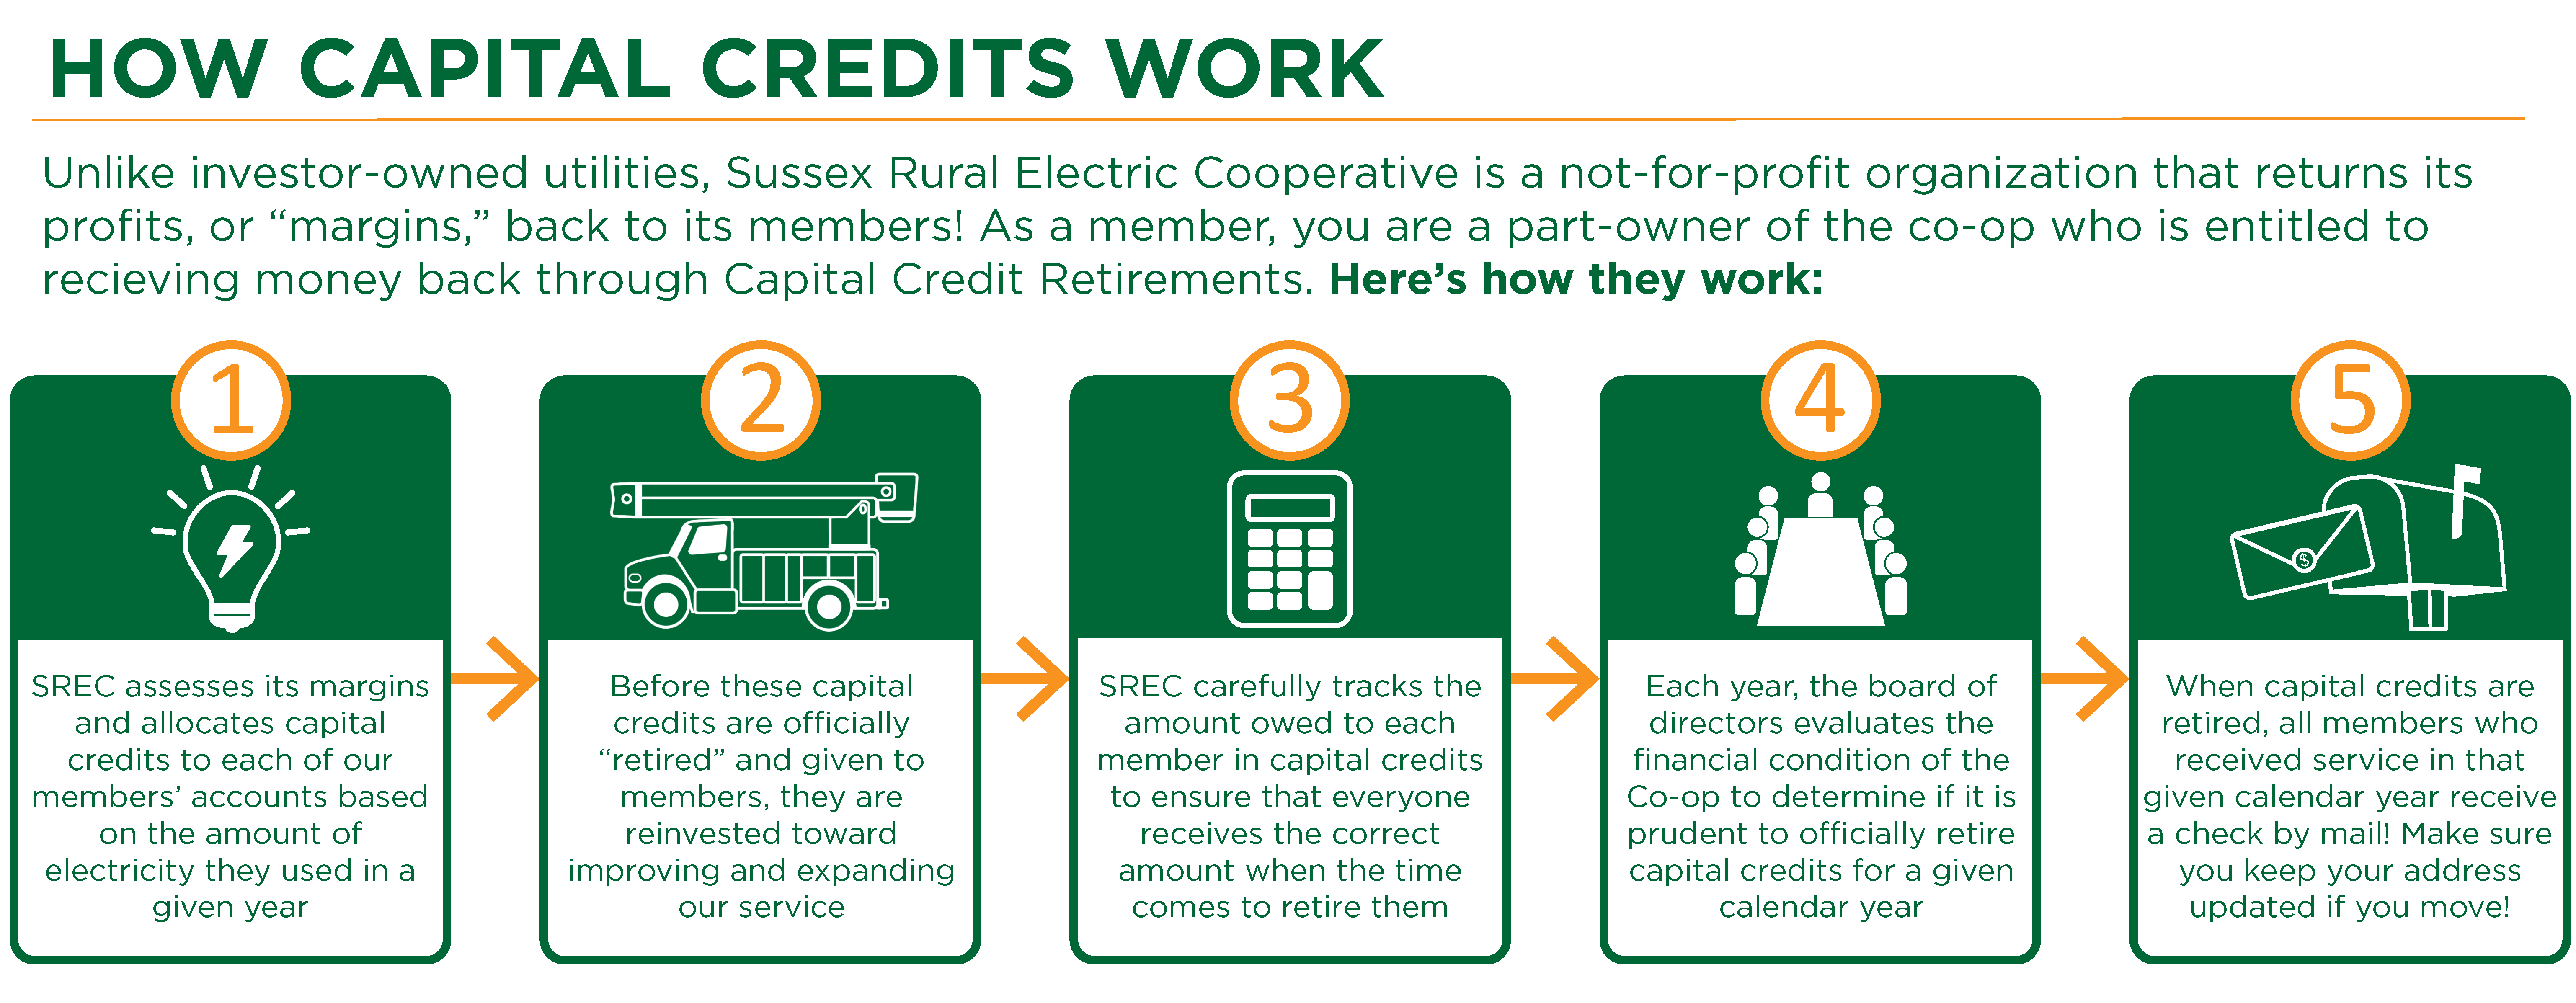 HOW CAPITAL CREDITS WORK | Unlike investor-owned utilities, Sussex Rural Electric Cooperative is a not-for-profit organization that returns its profits, or "margins," back to its members! As a member, you are a part-owner of the co-op who is entitled to receiving money back through Capital Credit Retirements. Here's how they work: 1.) SREC assesses its margins and allocates capital credits to each of our members' accounts based on the amount of electricity they used in a given year. 2.) Before these capital credits are officially "retired" and given to members, they are reinvested toward improving and expanding our service. 3.) SREC carefully tracks the amount owed to each member in capital credits to ensure that everyone received the correct amount when the time comes to retire them. 4.) Each year, the board of directors evaluates the financial condition of the Co-op to determine if it is prudent to officially retire capital credits for a given calendar year. 5.) When capital credits are retired, all members